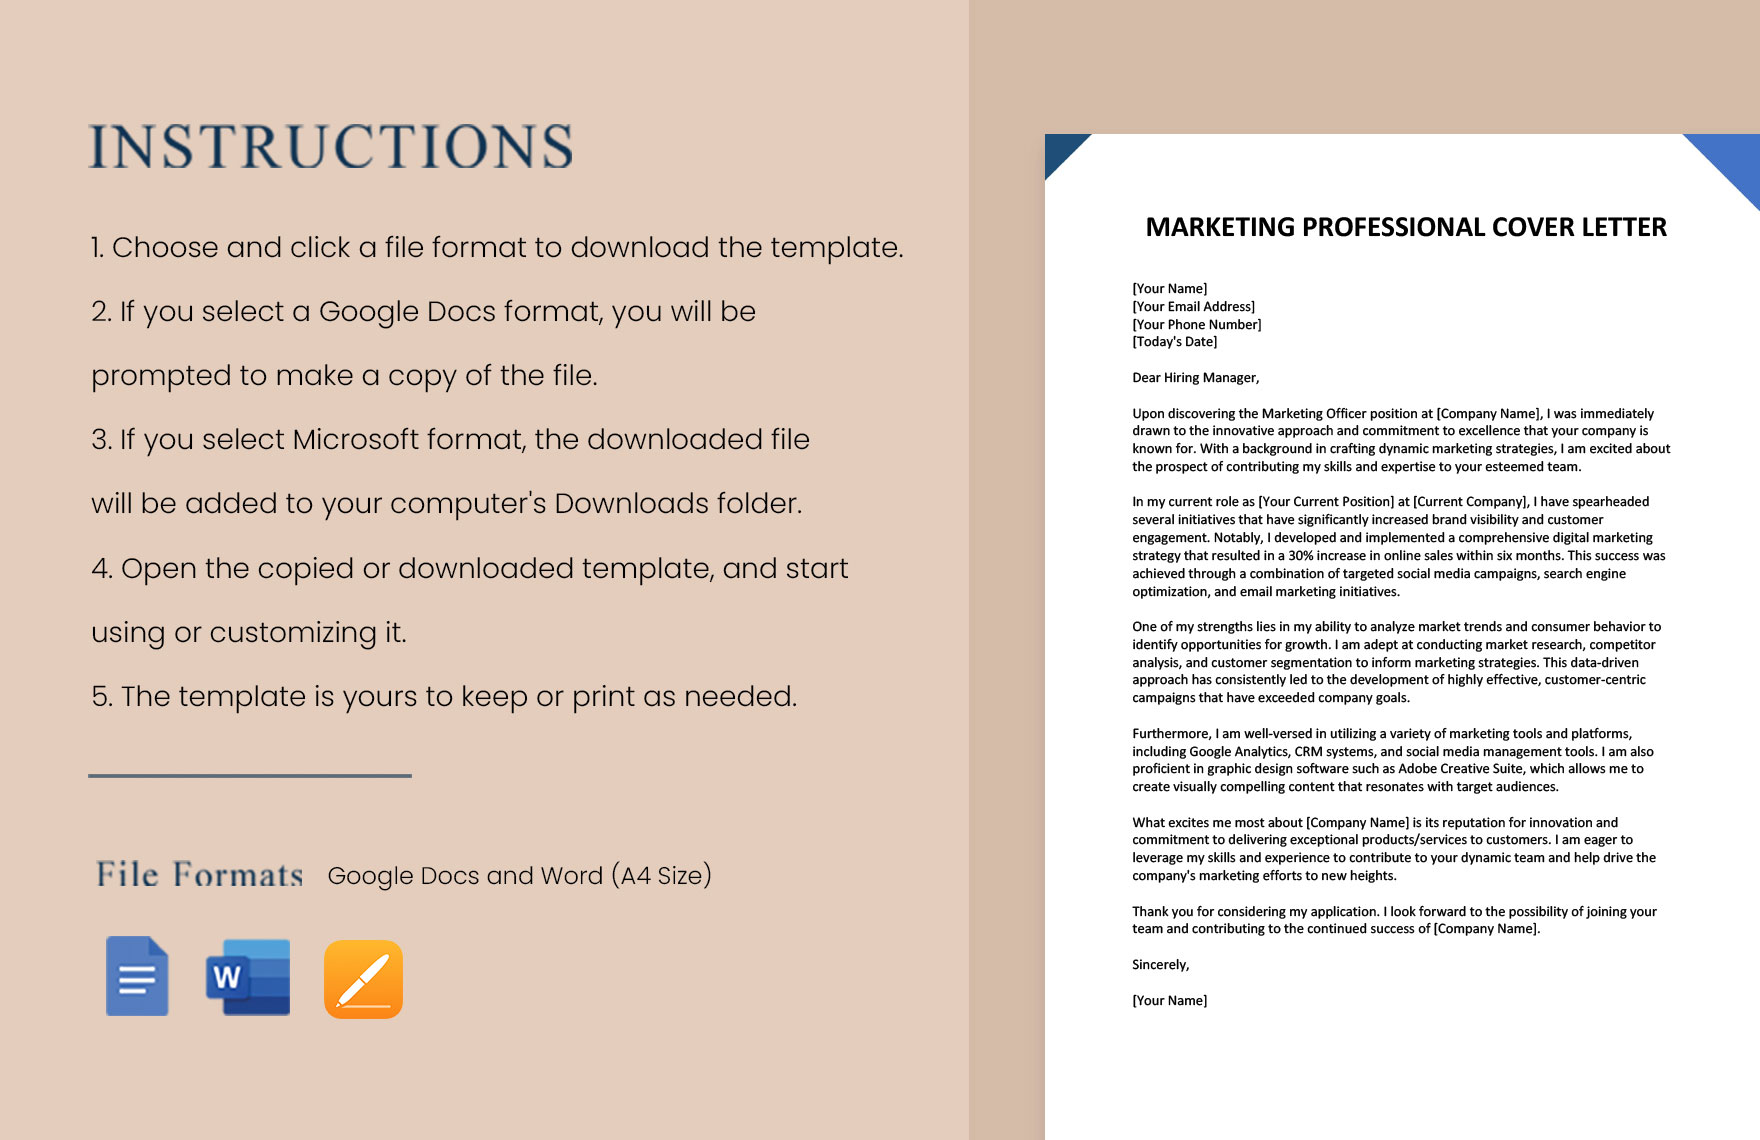 Marketing Professional Cover Letter